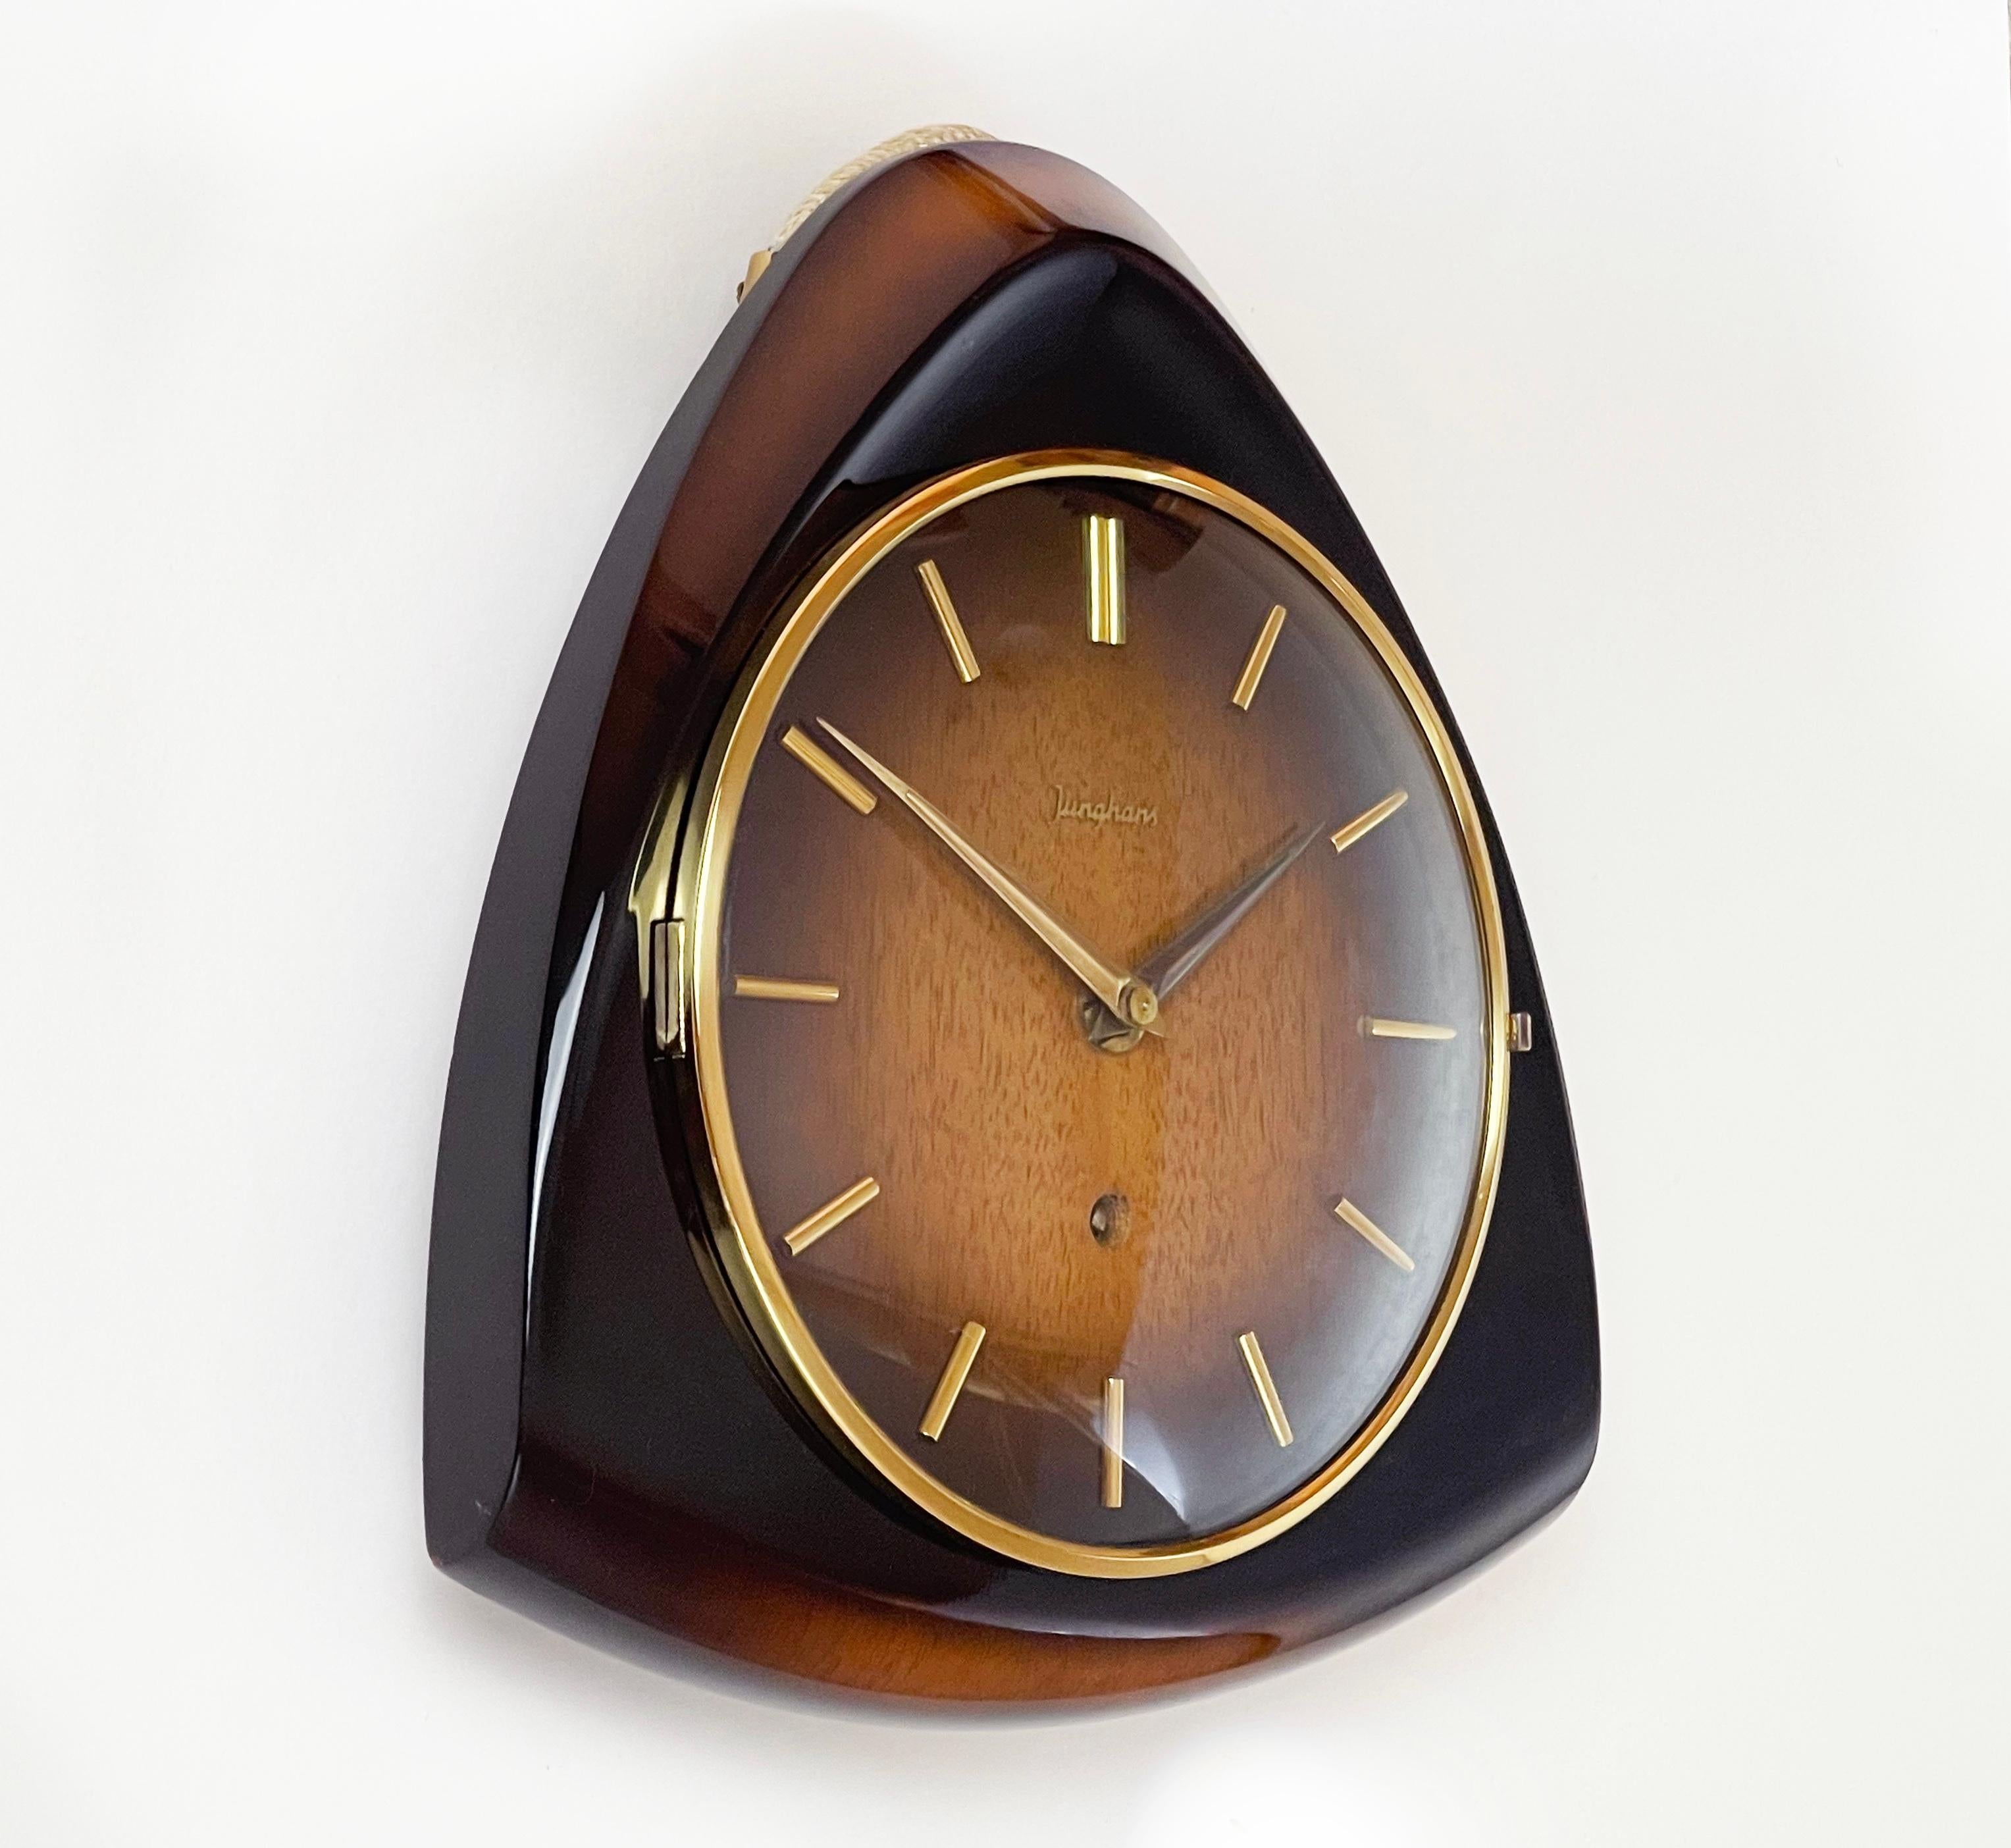 Outstanding finish & design by the famous German watch- and clock maker JUNGHANS.
Quite a futuristic approach, a masterpiece of mid-century design.
Made in the mid 50s to 60s, this wall clock is made from beech and comes with an absolutely fantastic